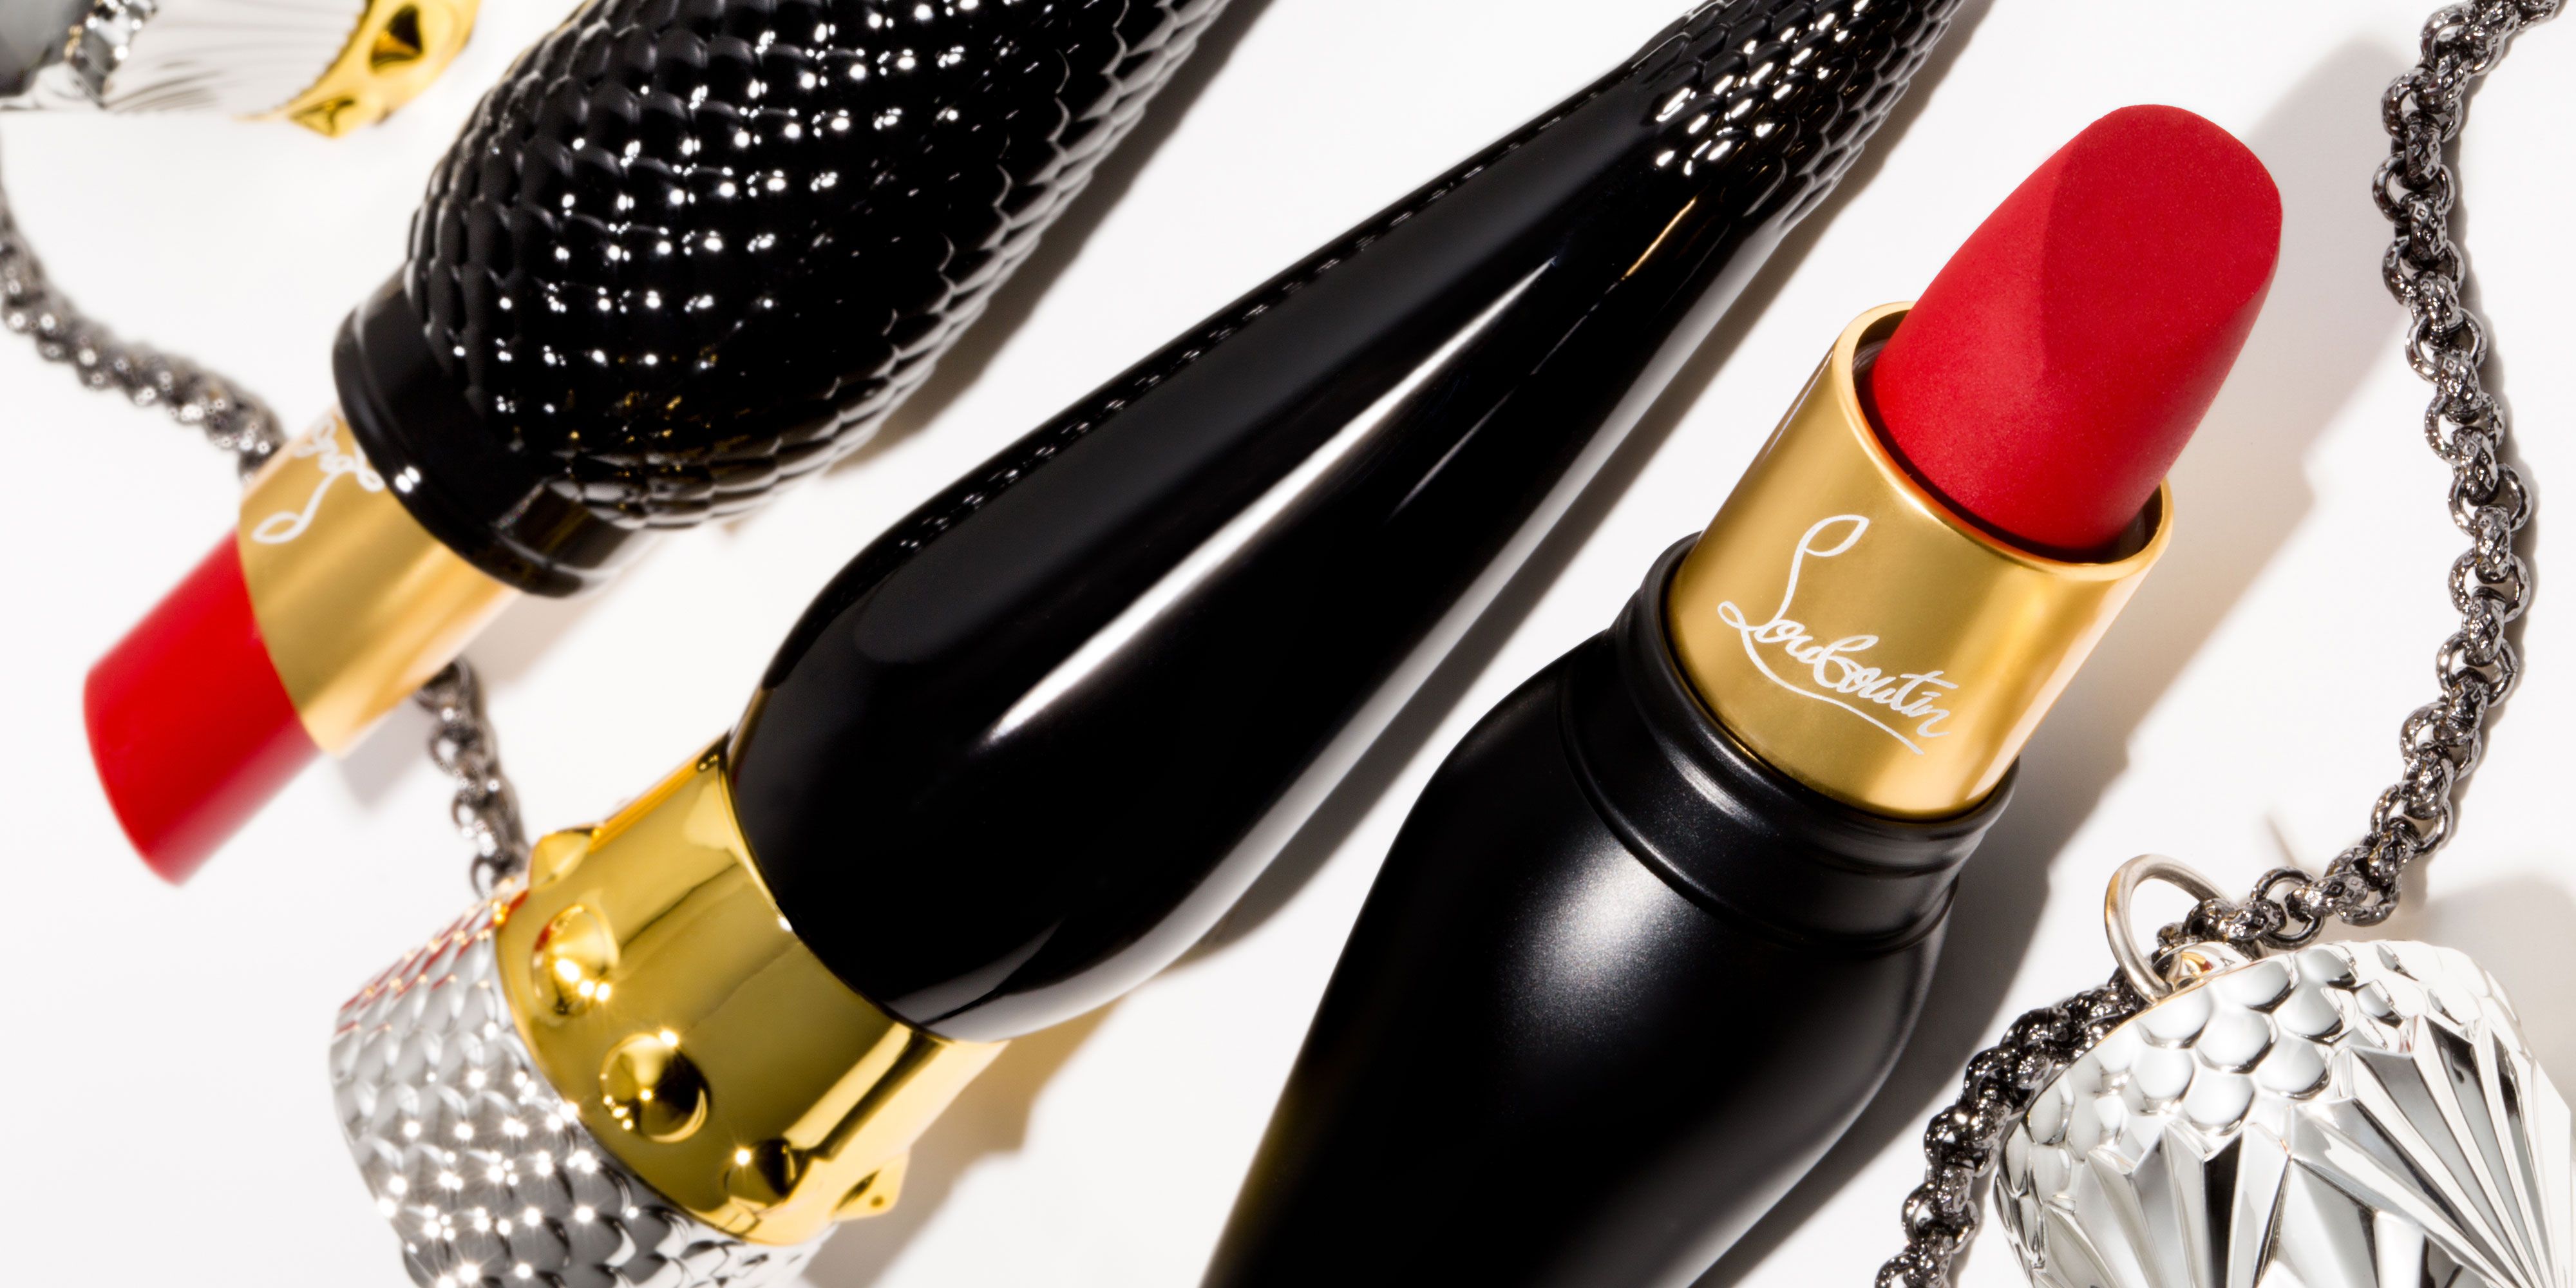 New Red Lip Colors from Christian Louboutin Red Lipstick Shades Collection